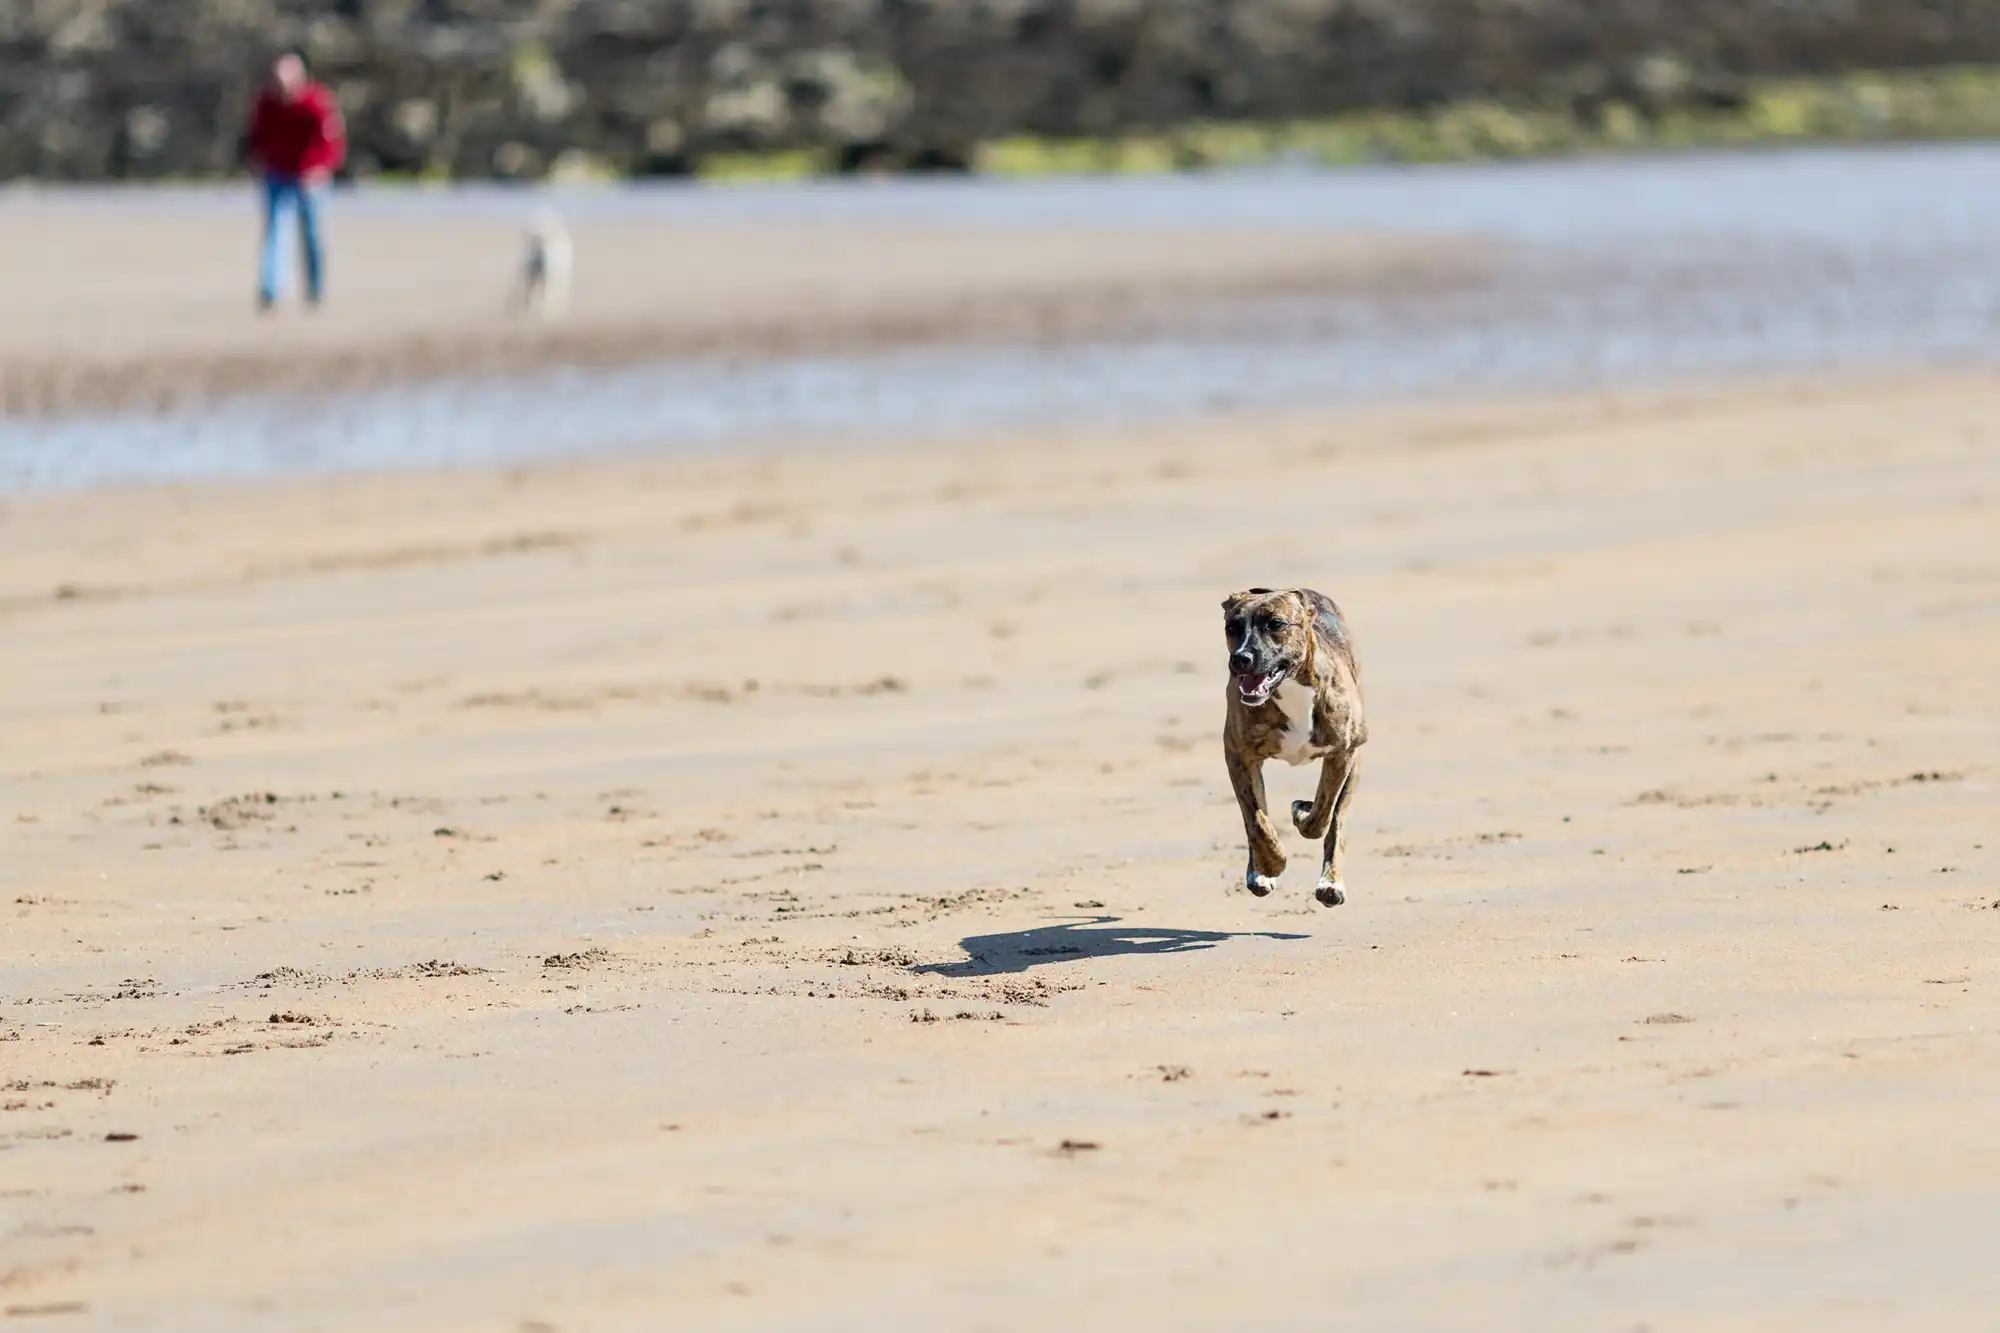 A dog running towards the camera on a sandy beach, with a person and another dog in the background.